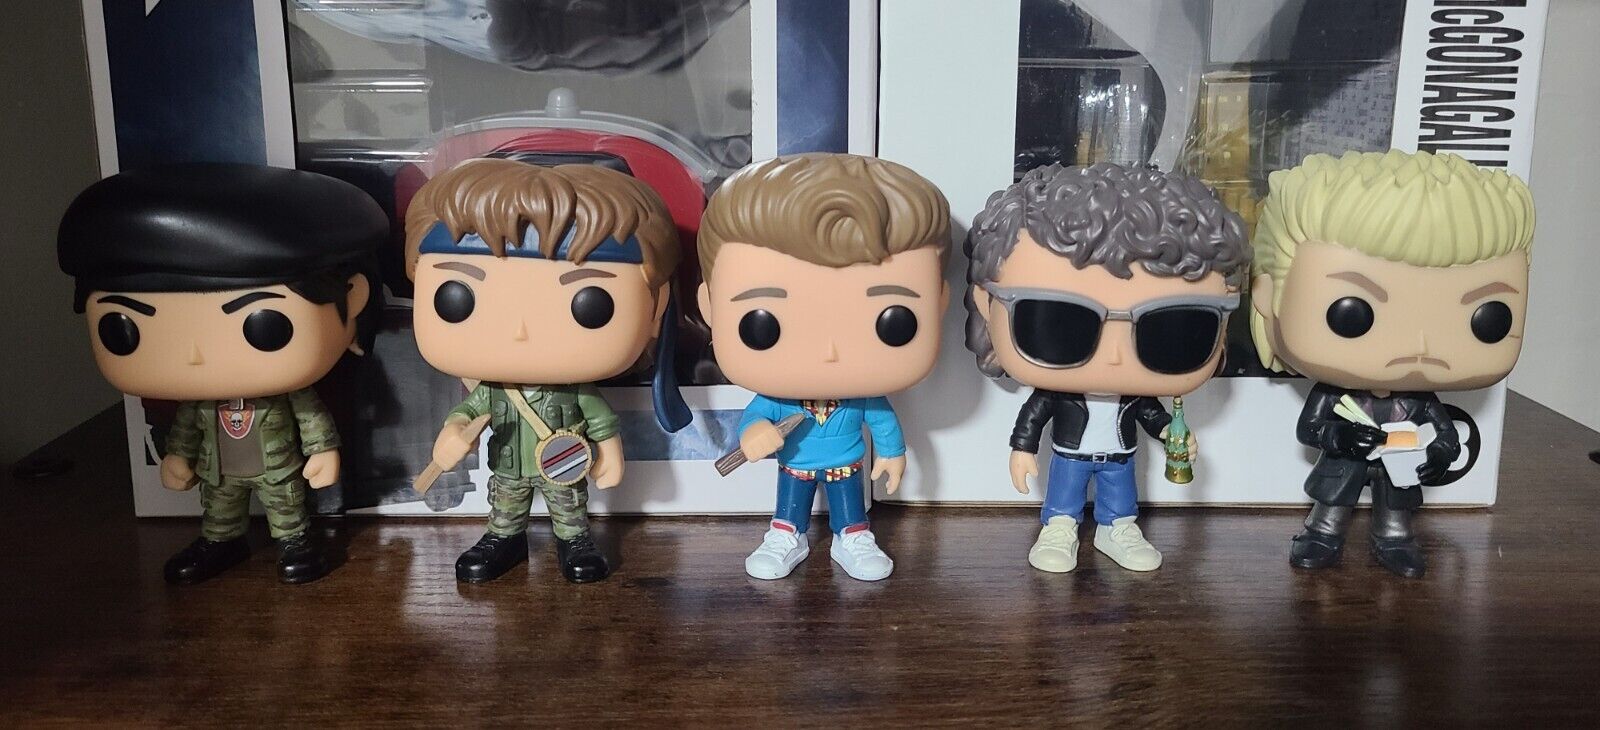 The Lost Boys Funko Pop - Out of Box Lot Of 5/Vinyl Figure (Vaulted) OOB